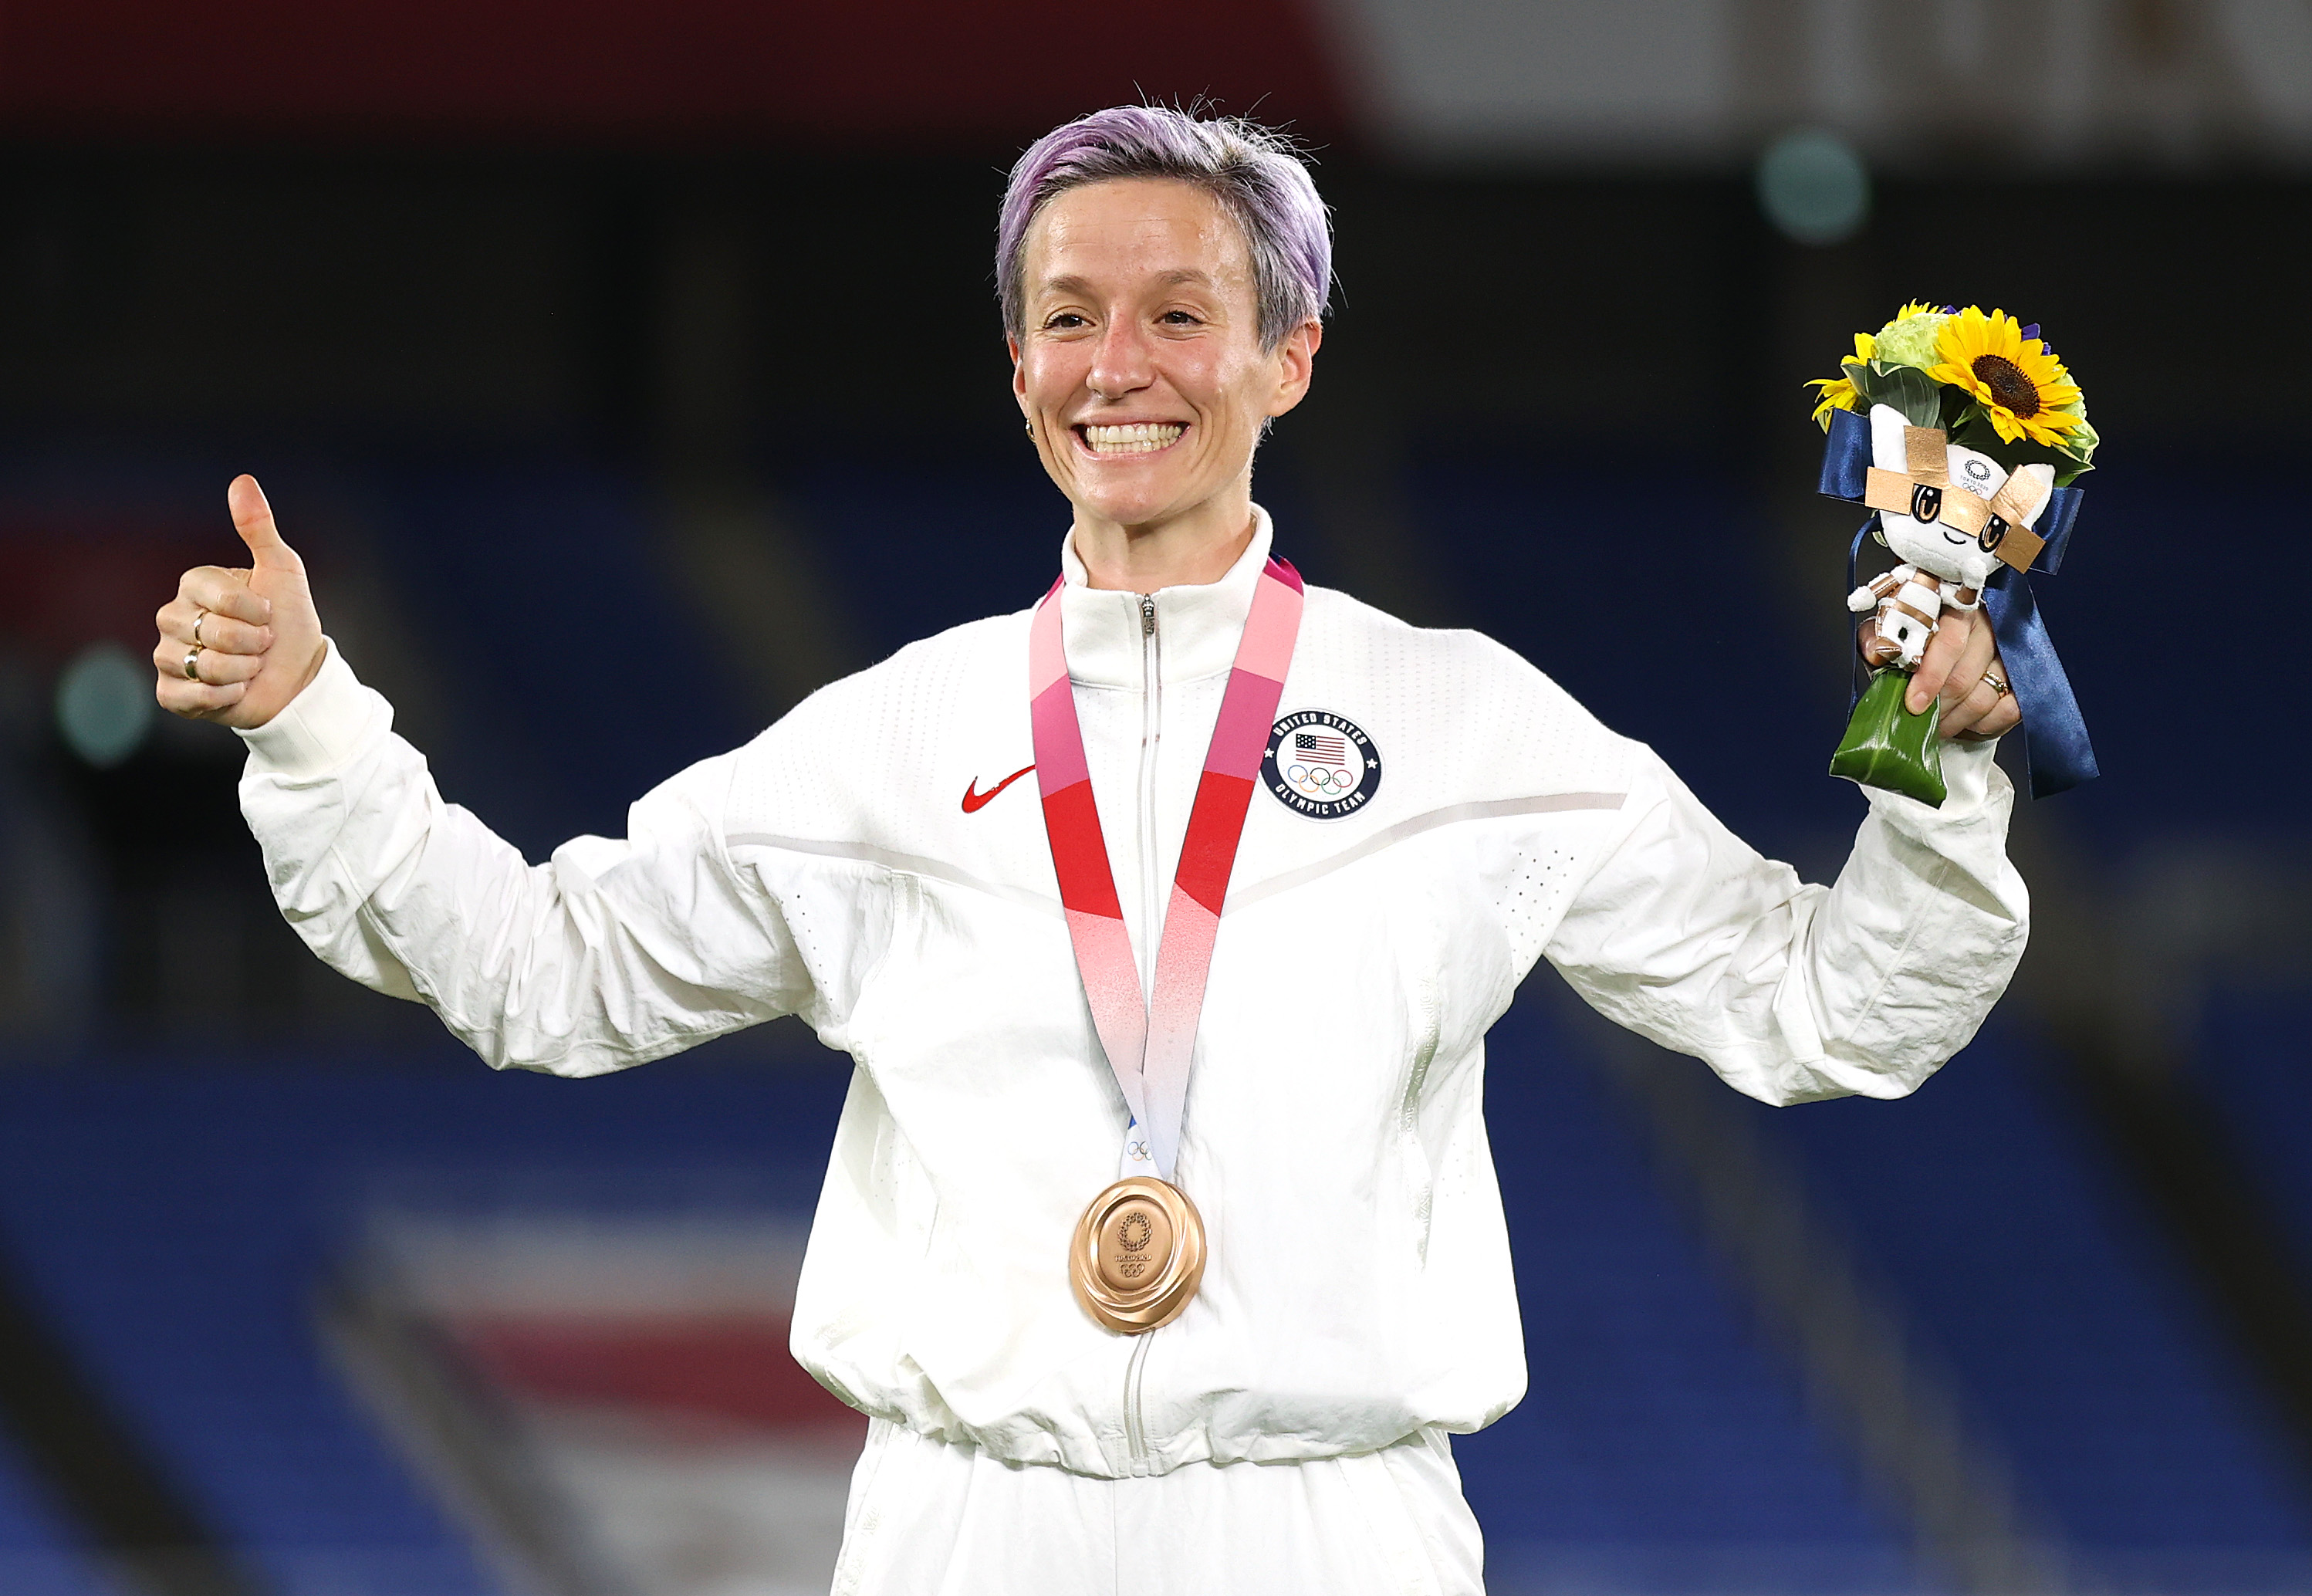 Megan Rapinoe of team United States poses with her bronze medal during the Women's Football Competition Medal Ceremony of the Tokyo 2020 Olympic Games on August 6, 2021, in Yokohama, Kanagawa, Japan | Source: Getty Images